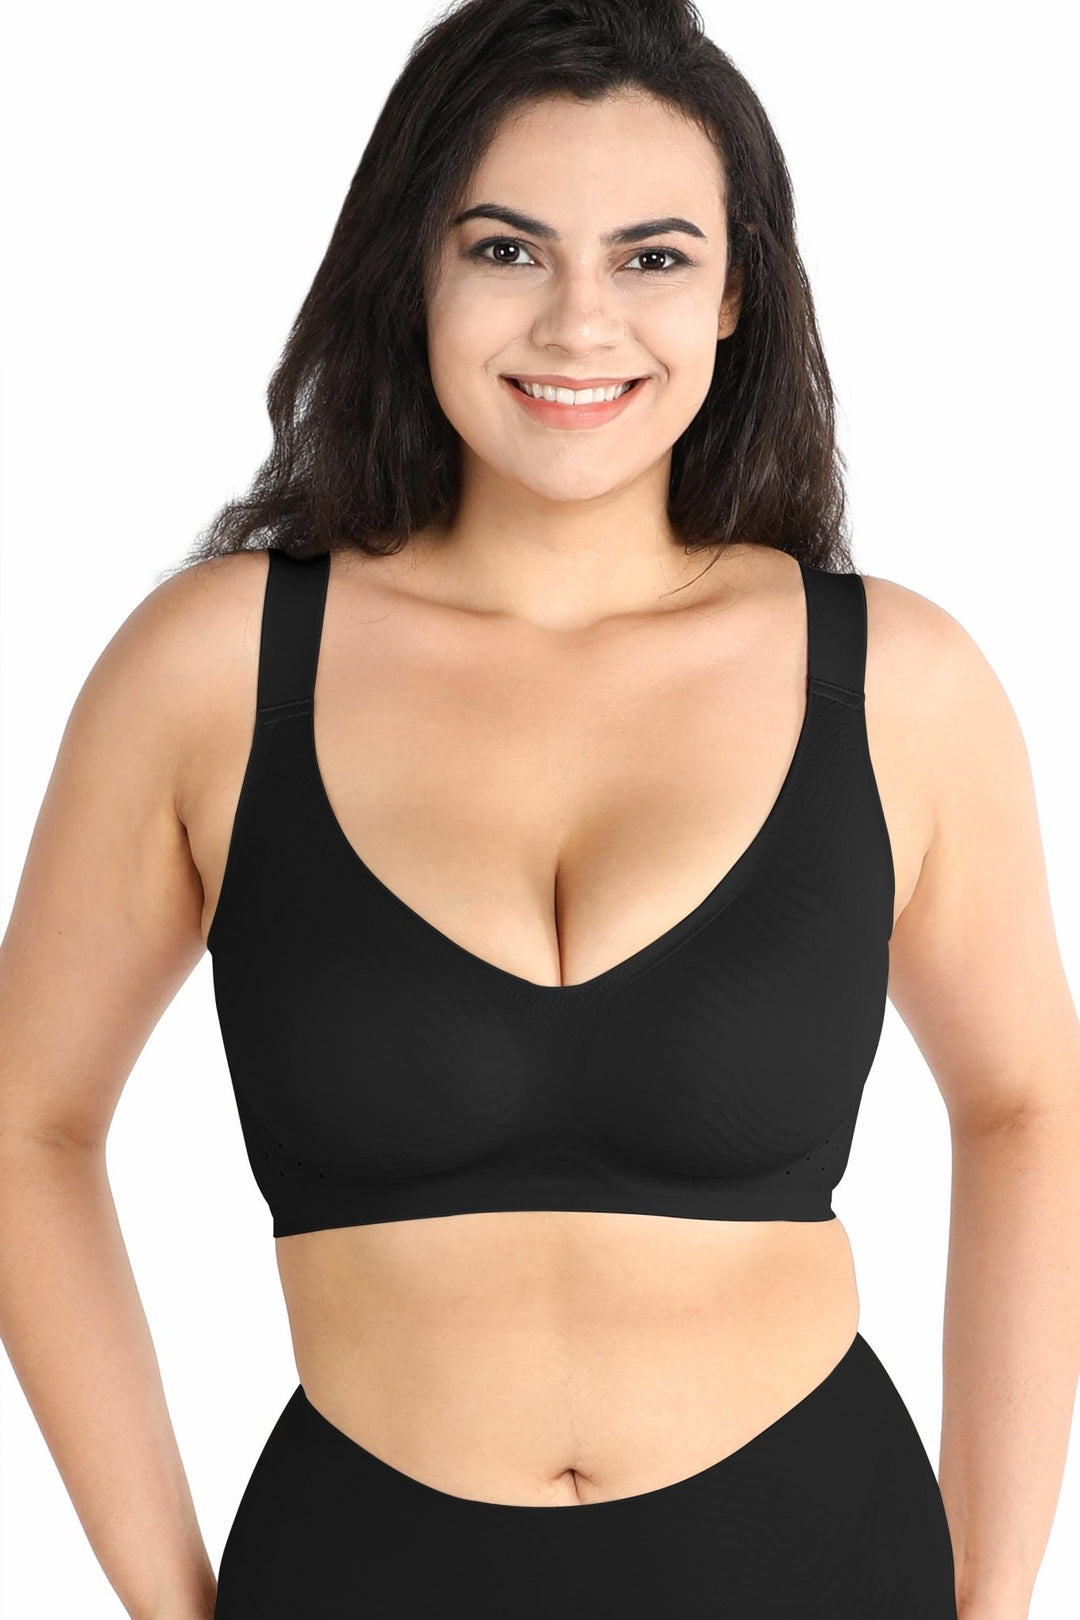 Easy pieces Plus Size Bras for Women, Comfort Wireless Bras with